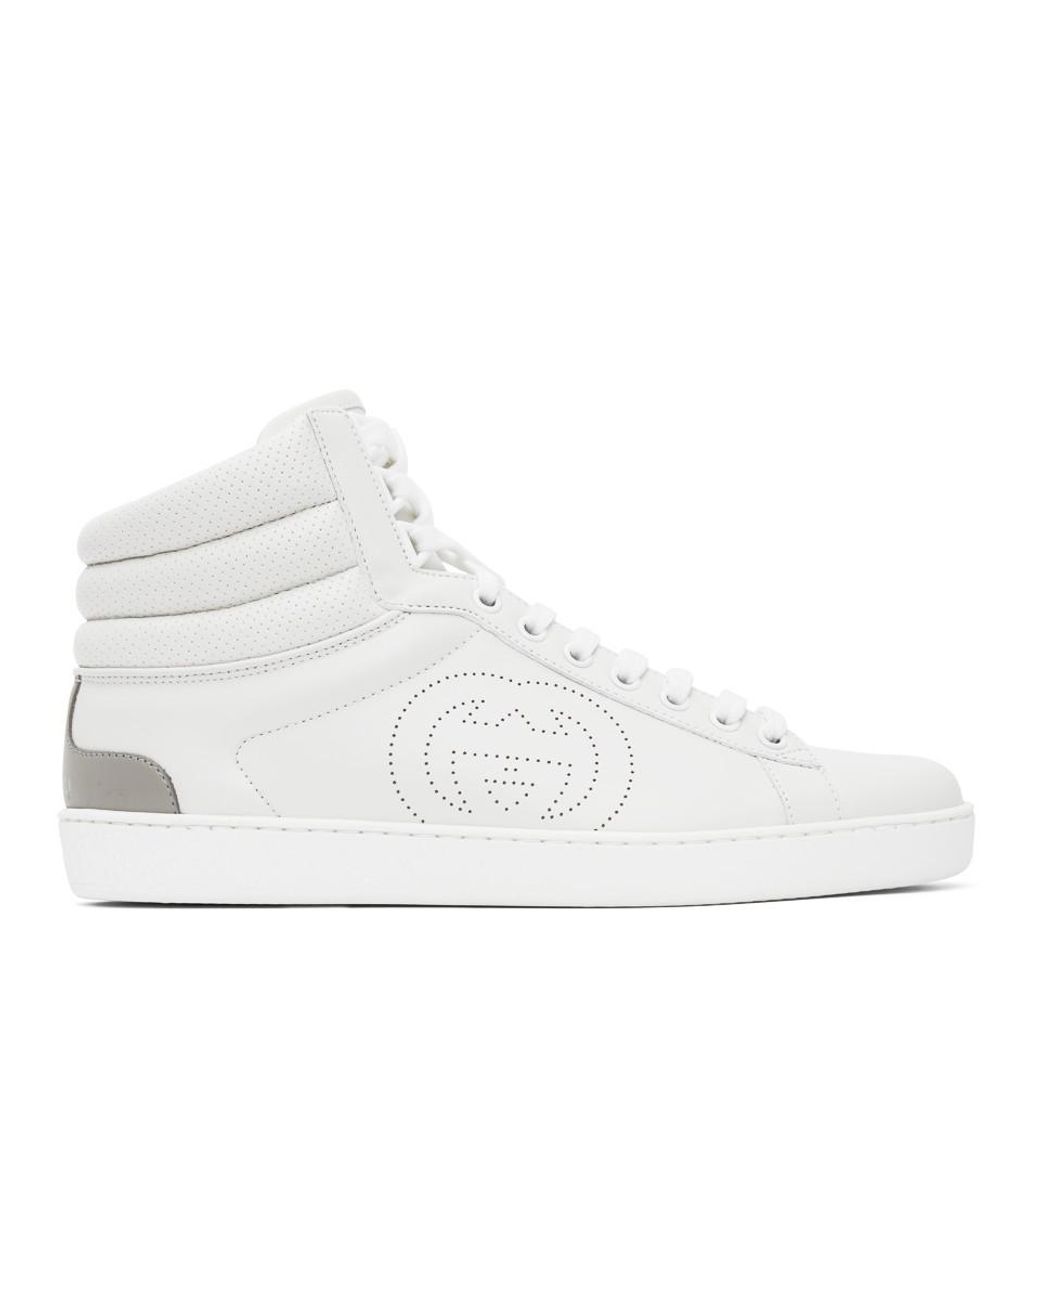 Gucci High-top Ace Sneaker in White for Men - Save 17% - Lyst